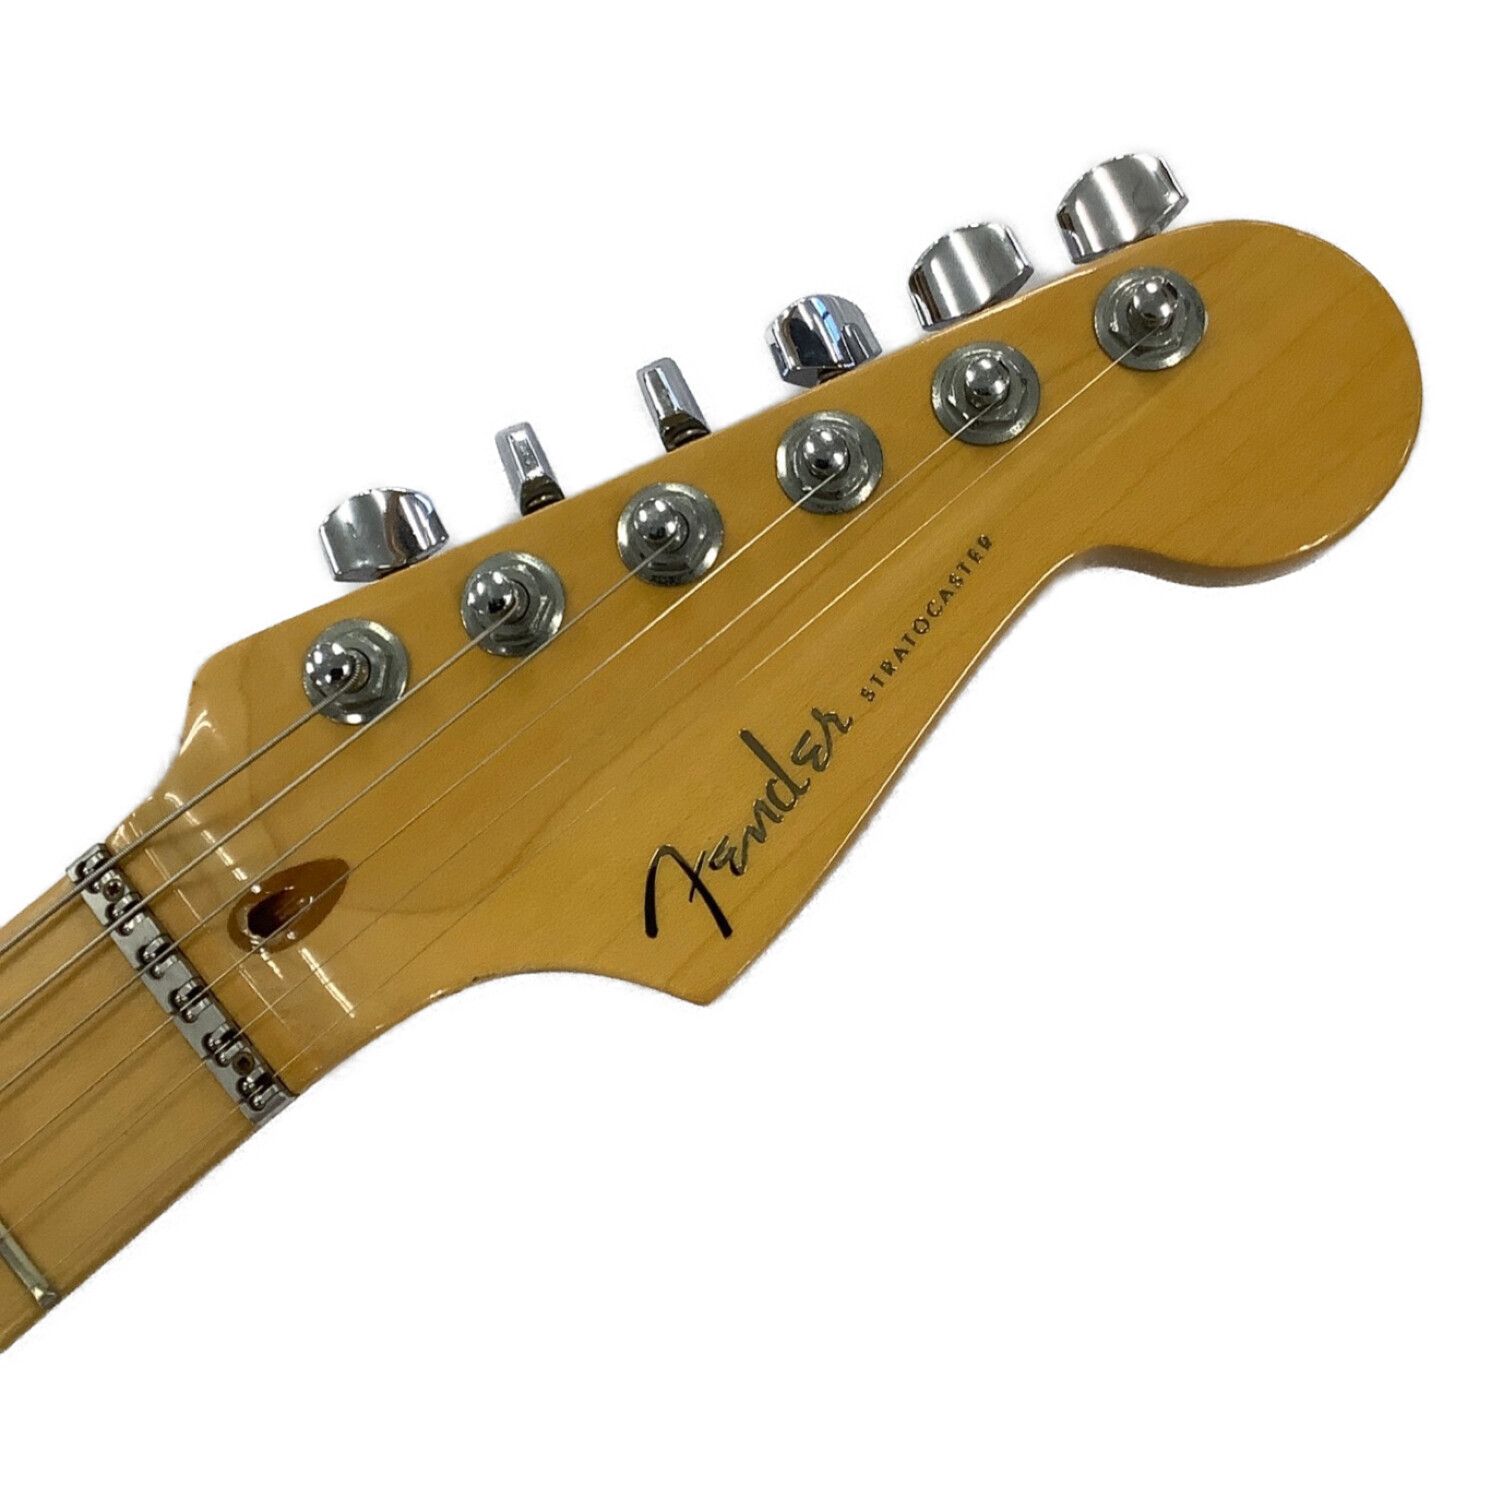 FENDER USA (フェンダーＵＳＡ) エレキギター American Deluxe 